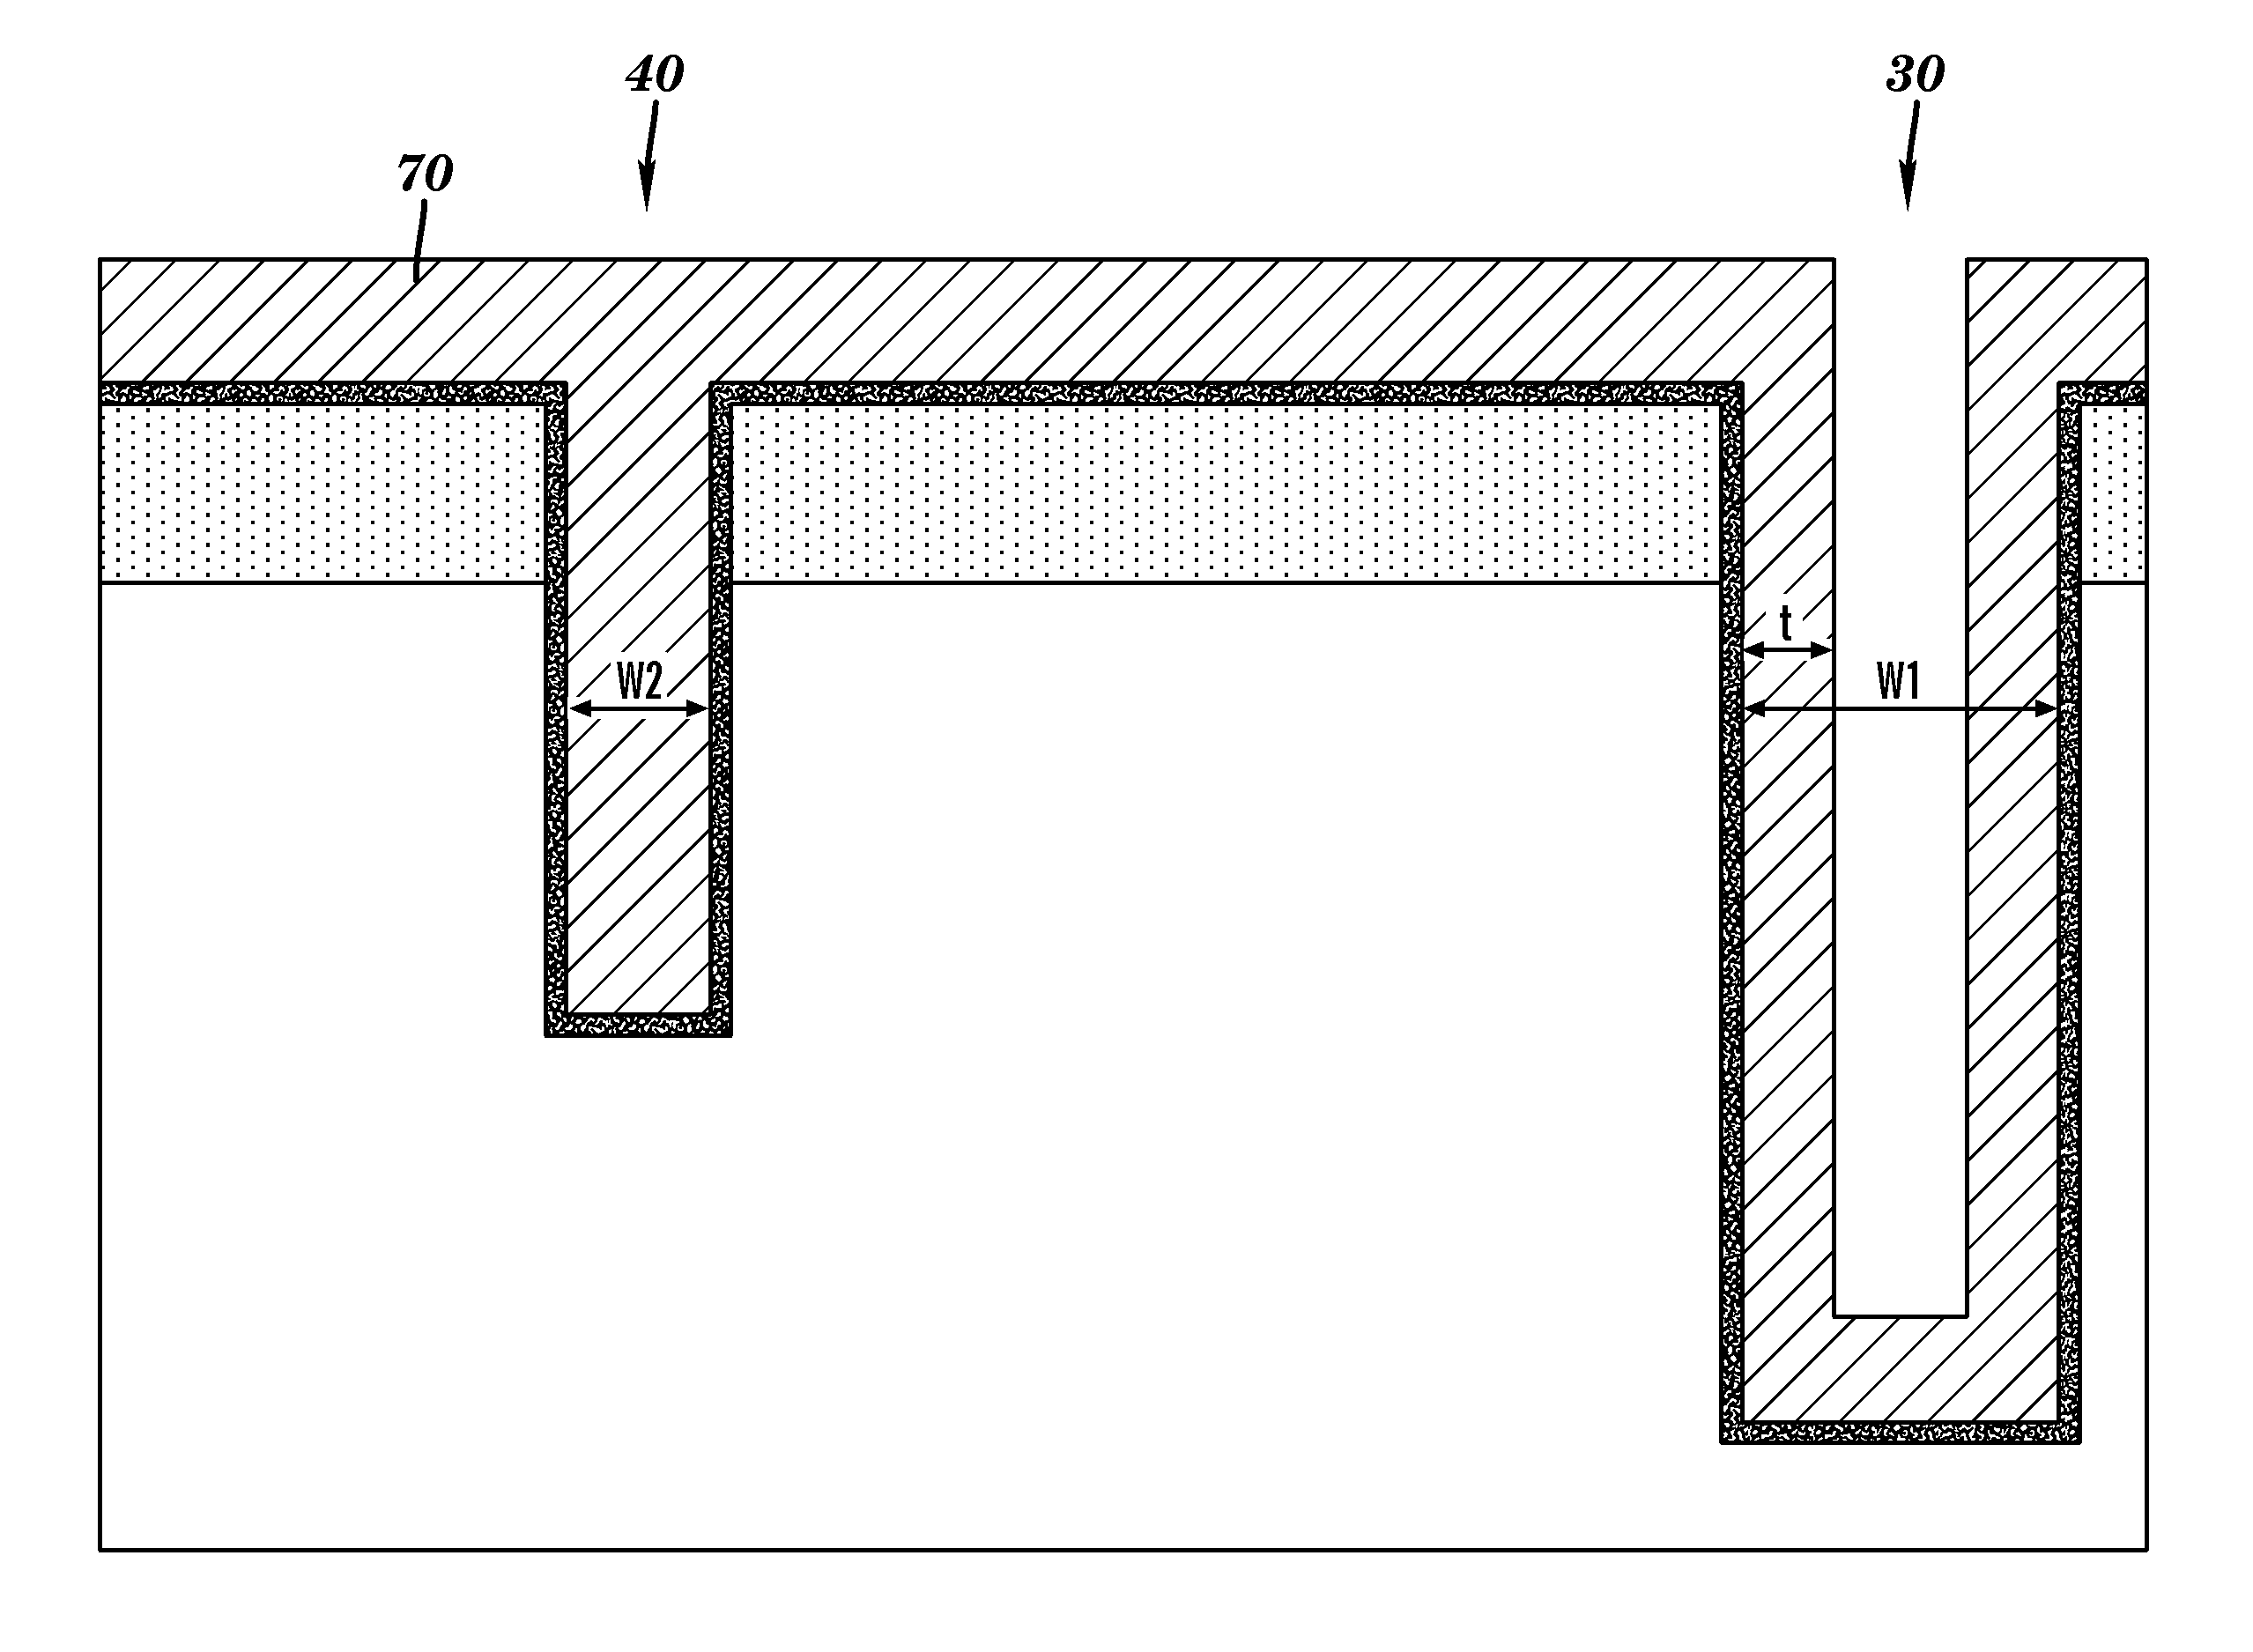 Structure and method for simultaneously forming a through silicon via and a deep trench structure